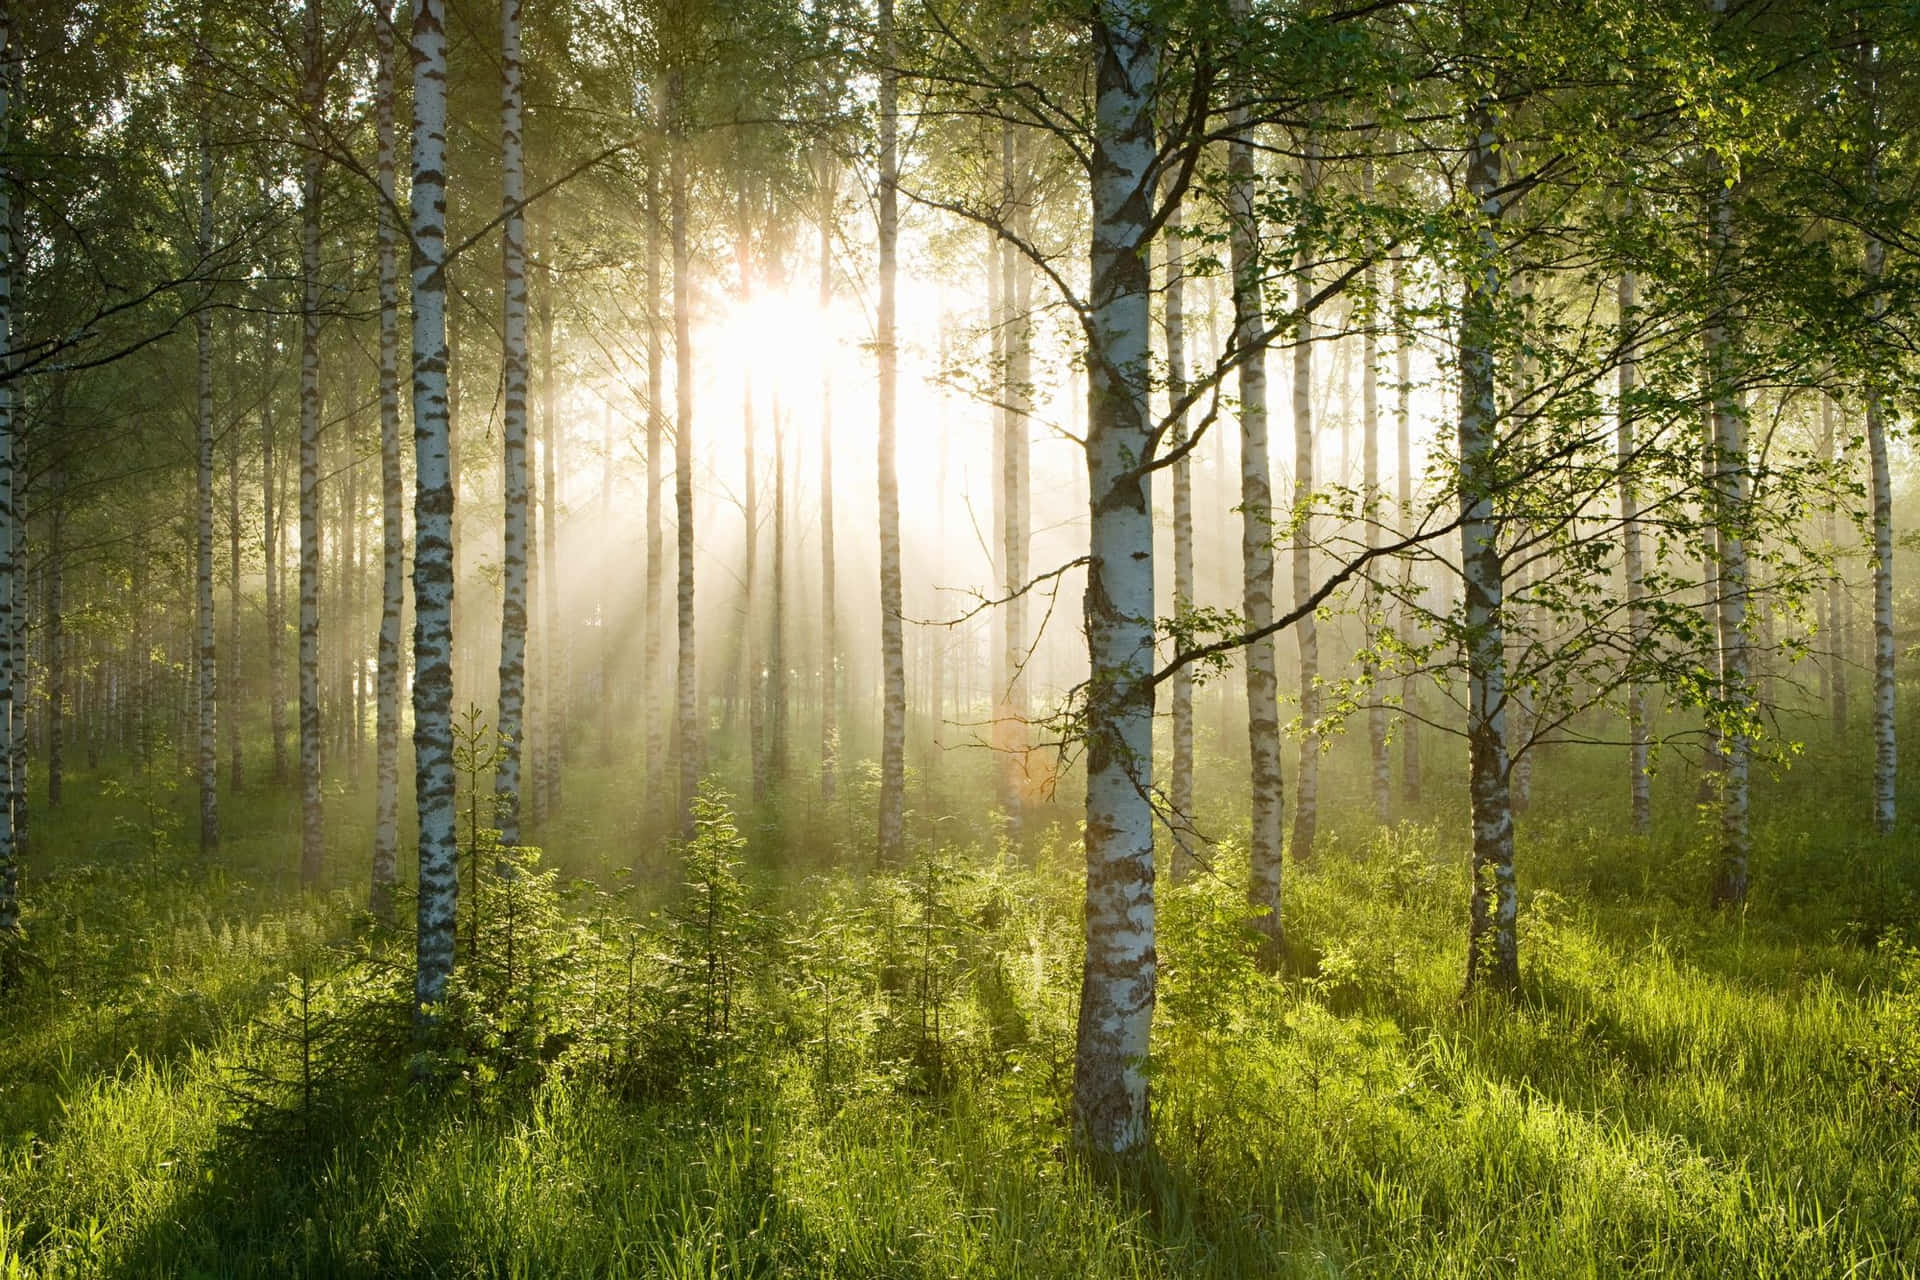 birch forest with sun rays shining through the trees